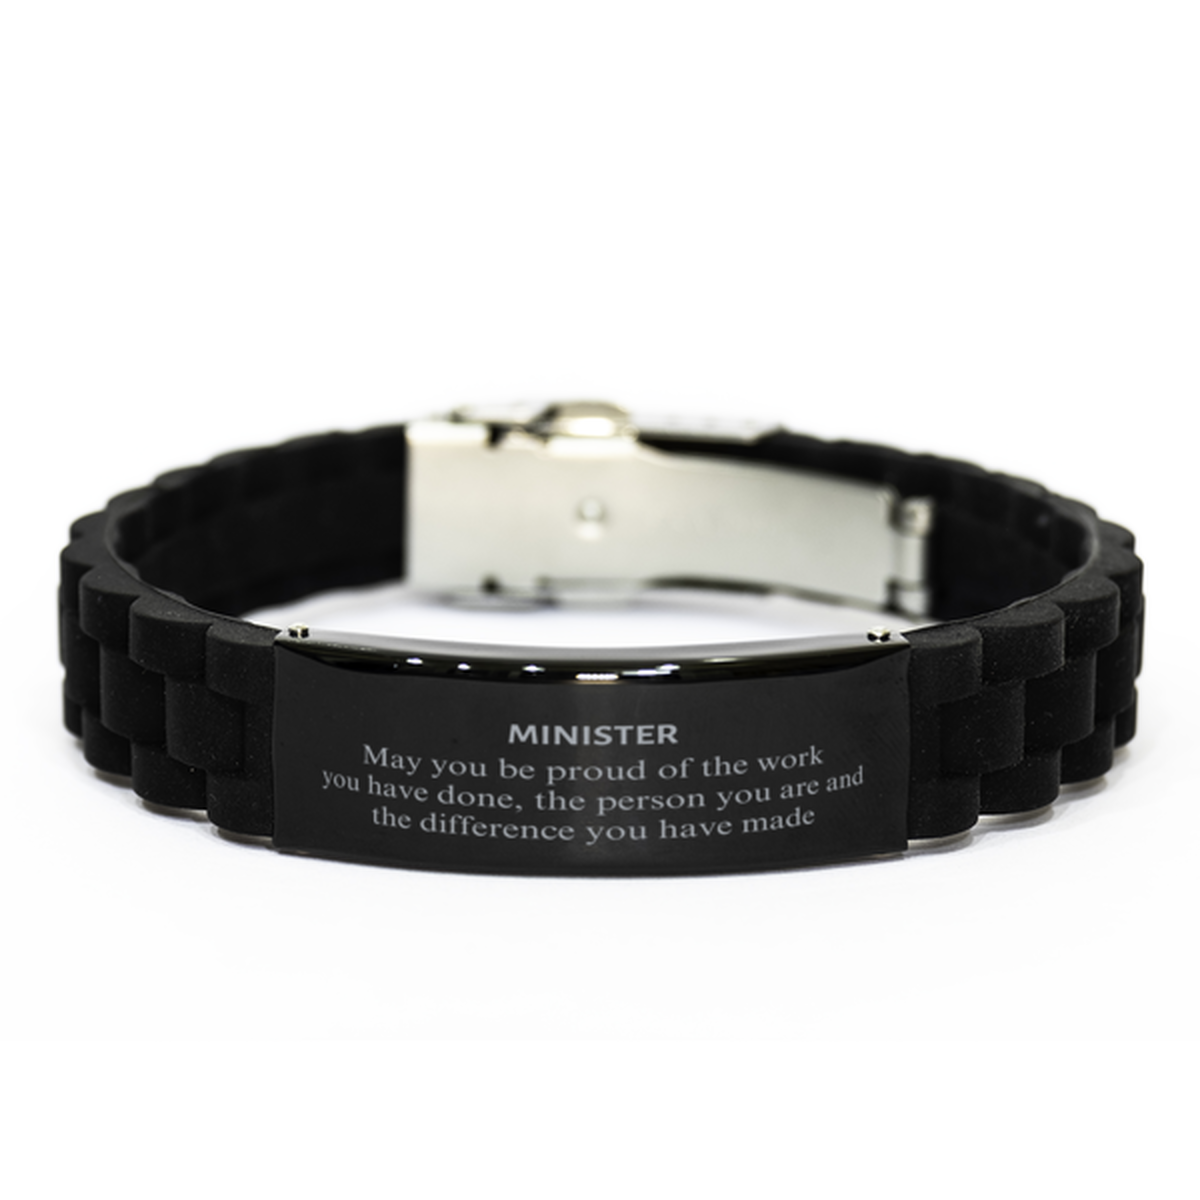 Minister May you be proud of the work you have done, Retirement Minister Black Glidelock Clasp Bracelet for Colleague Appreciation Gifts Amazing for Minister